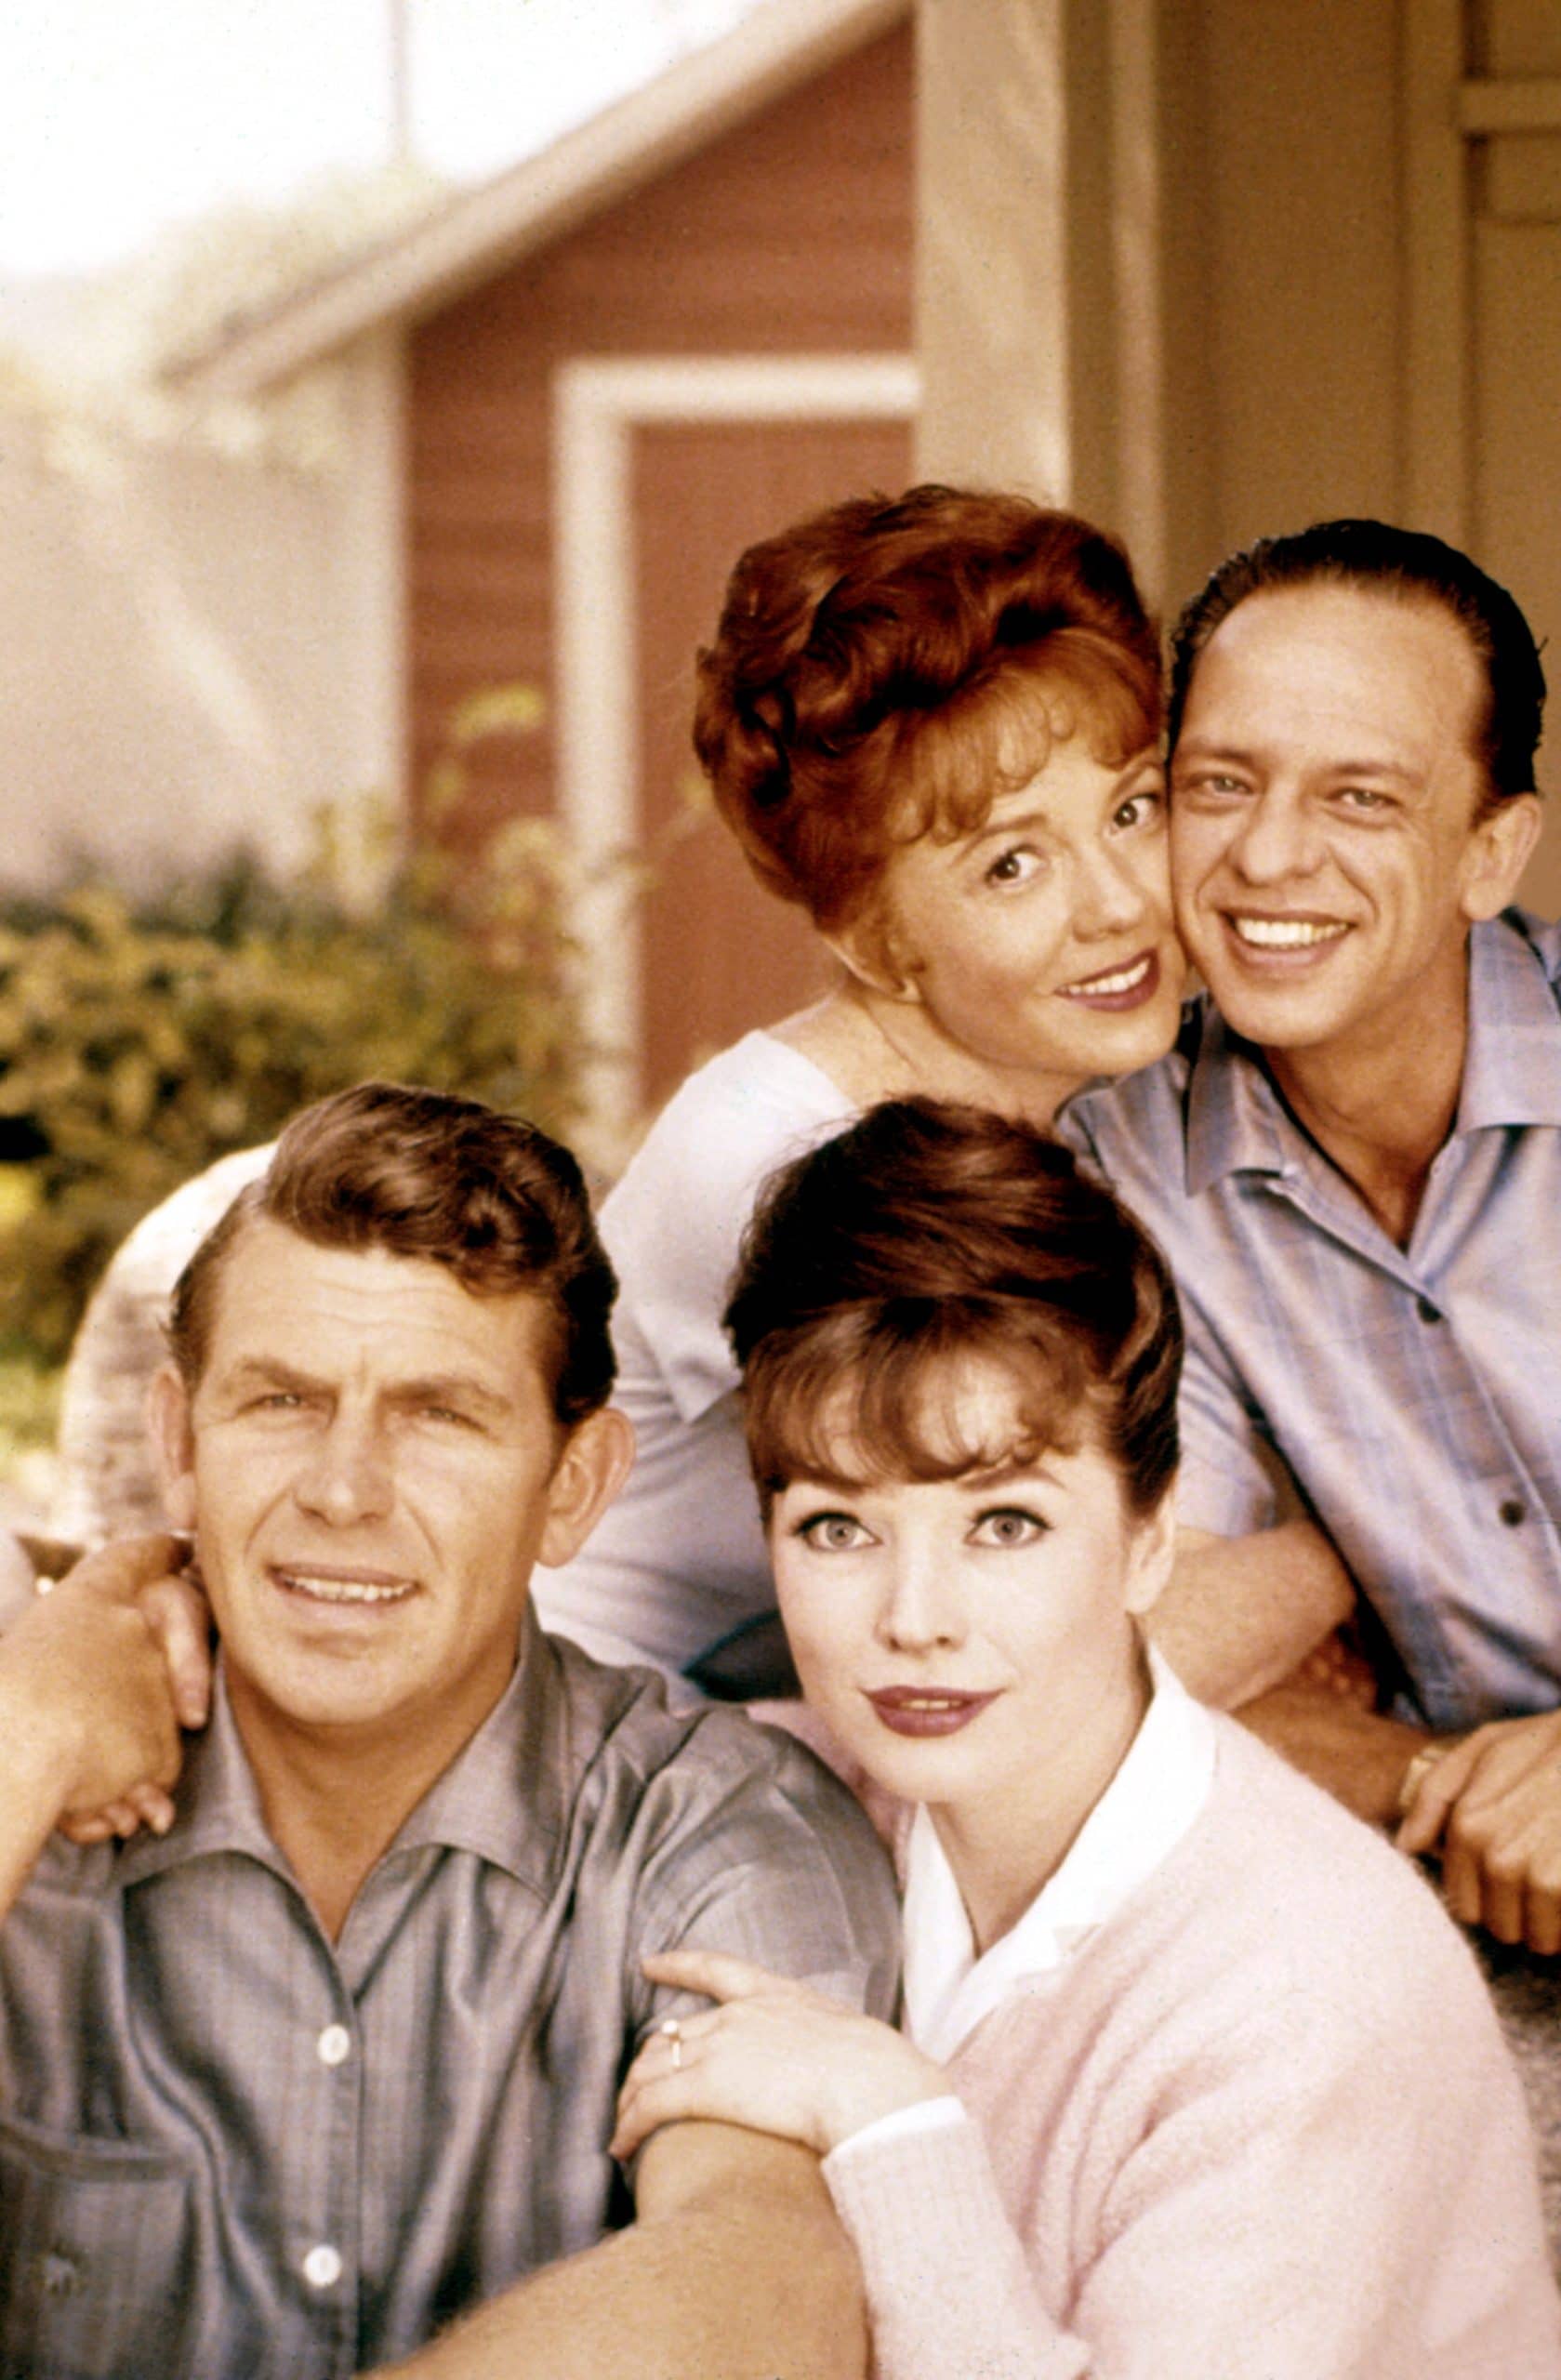 THE ANDY GRIFFITH SHOW, Betty Lynn, Don Knotts, Aneta Corseaut, Andy Griffith, Season 5